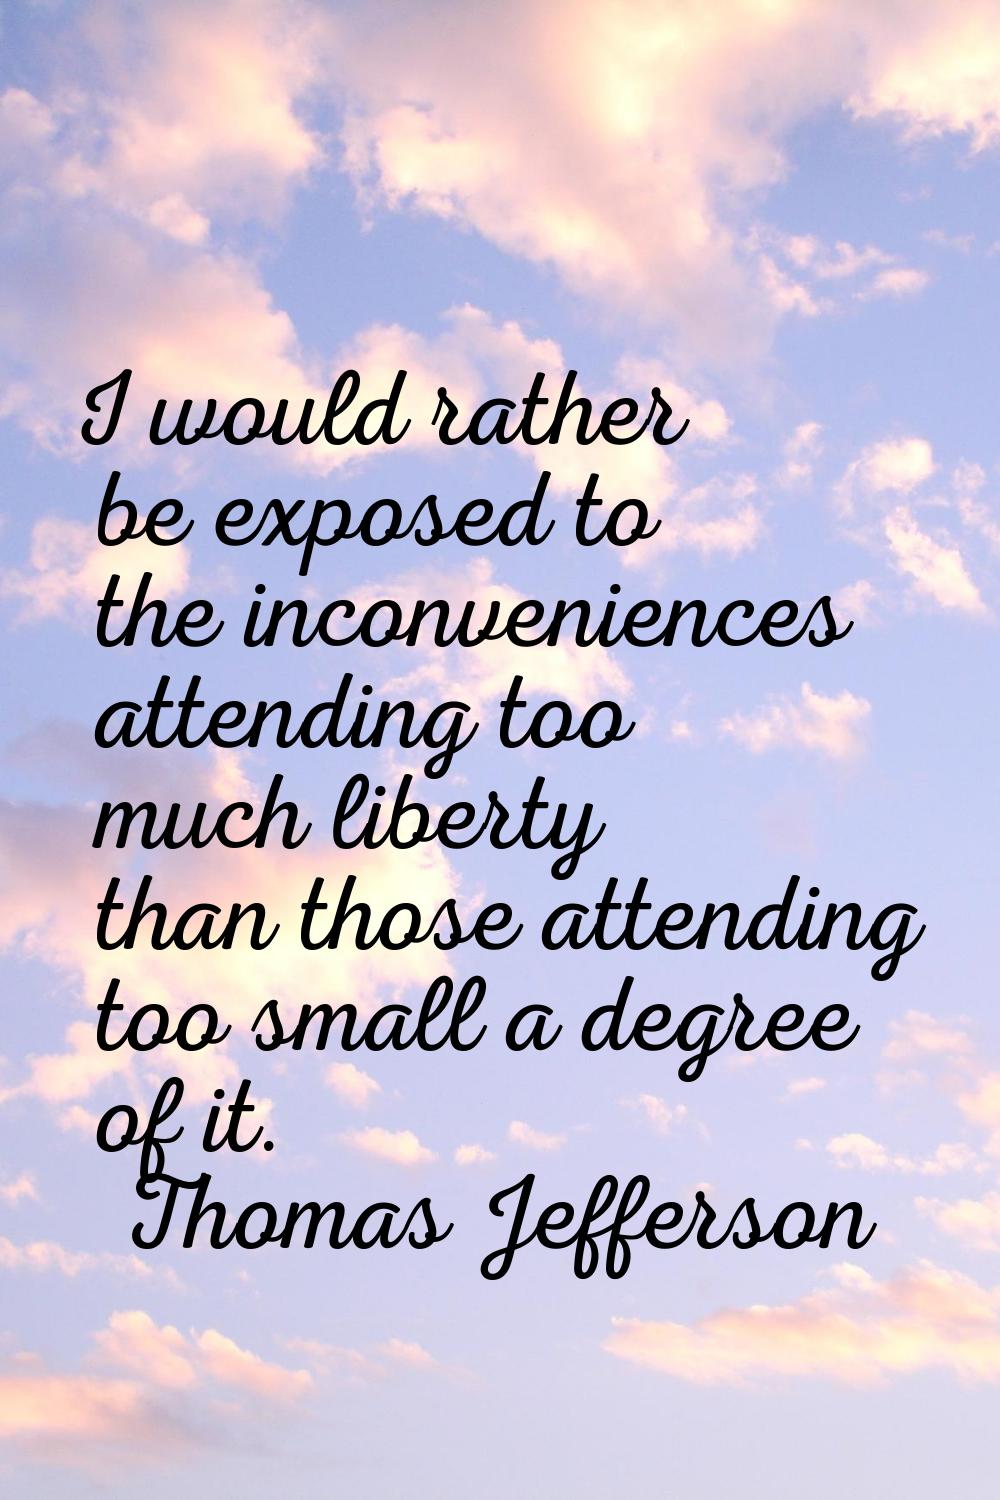 I would rather be exposed to the inconveniences attending too much liberty than those attending too